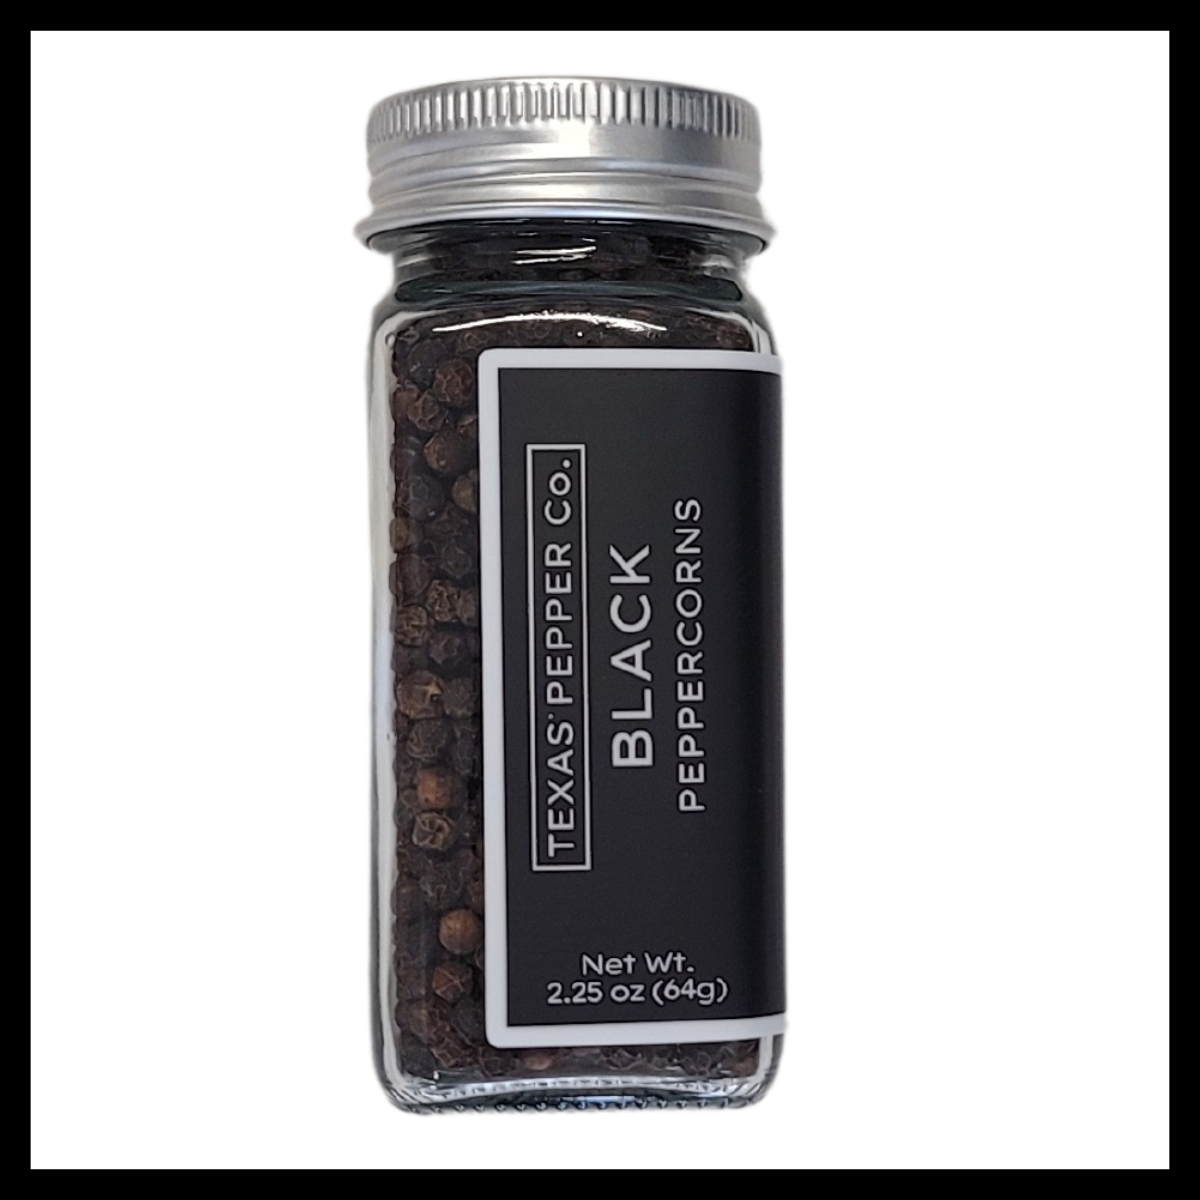 Where Does Black Pepper Come From? What is Black Peppercorn?